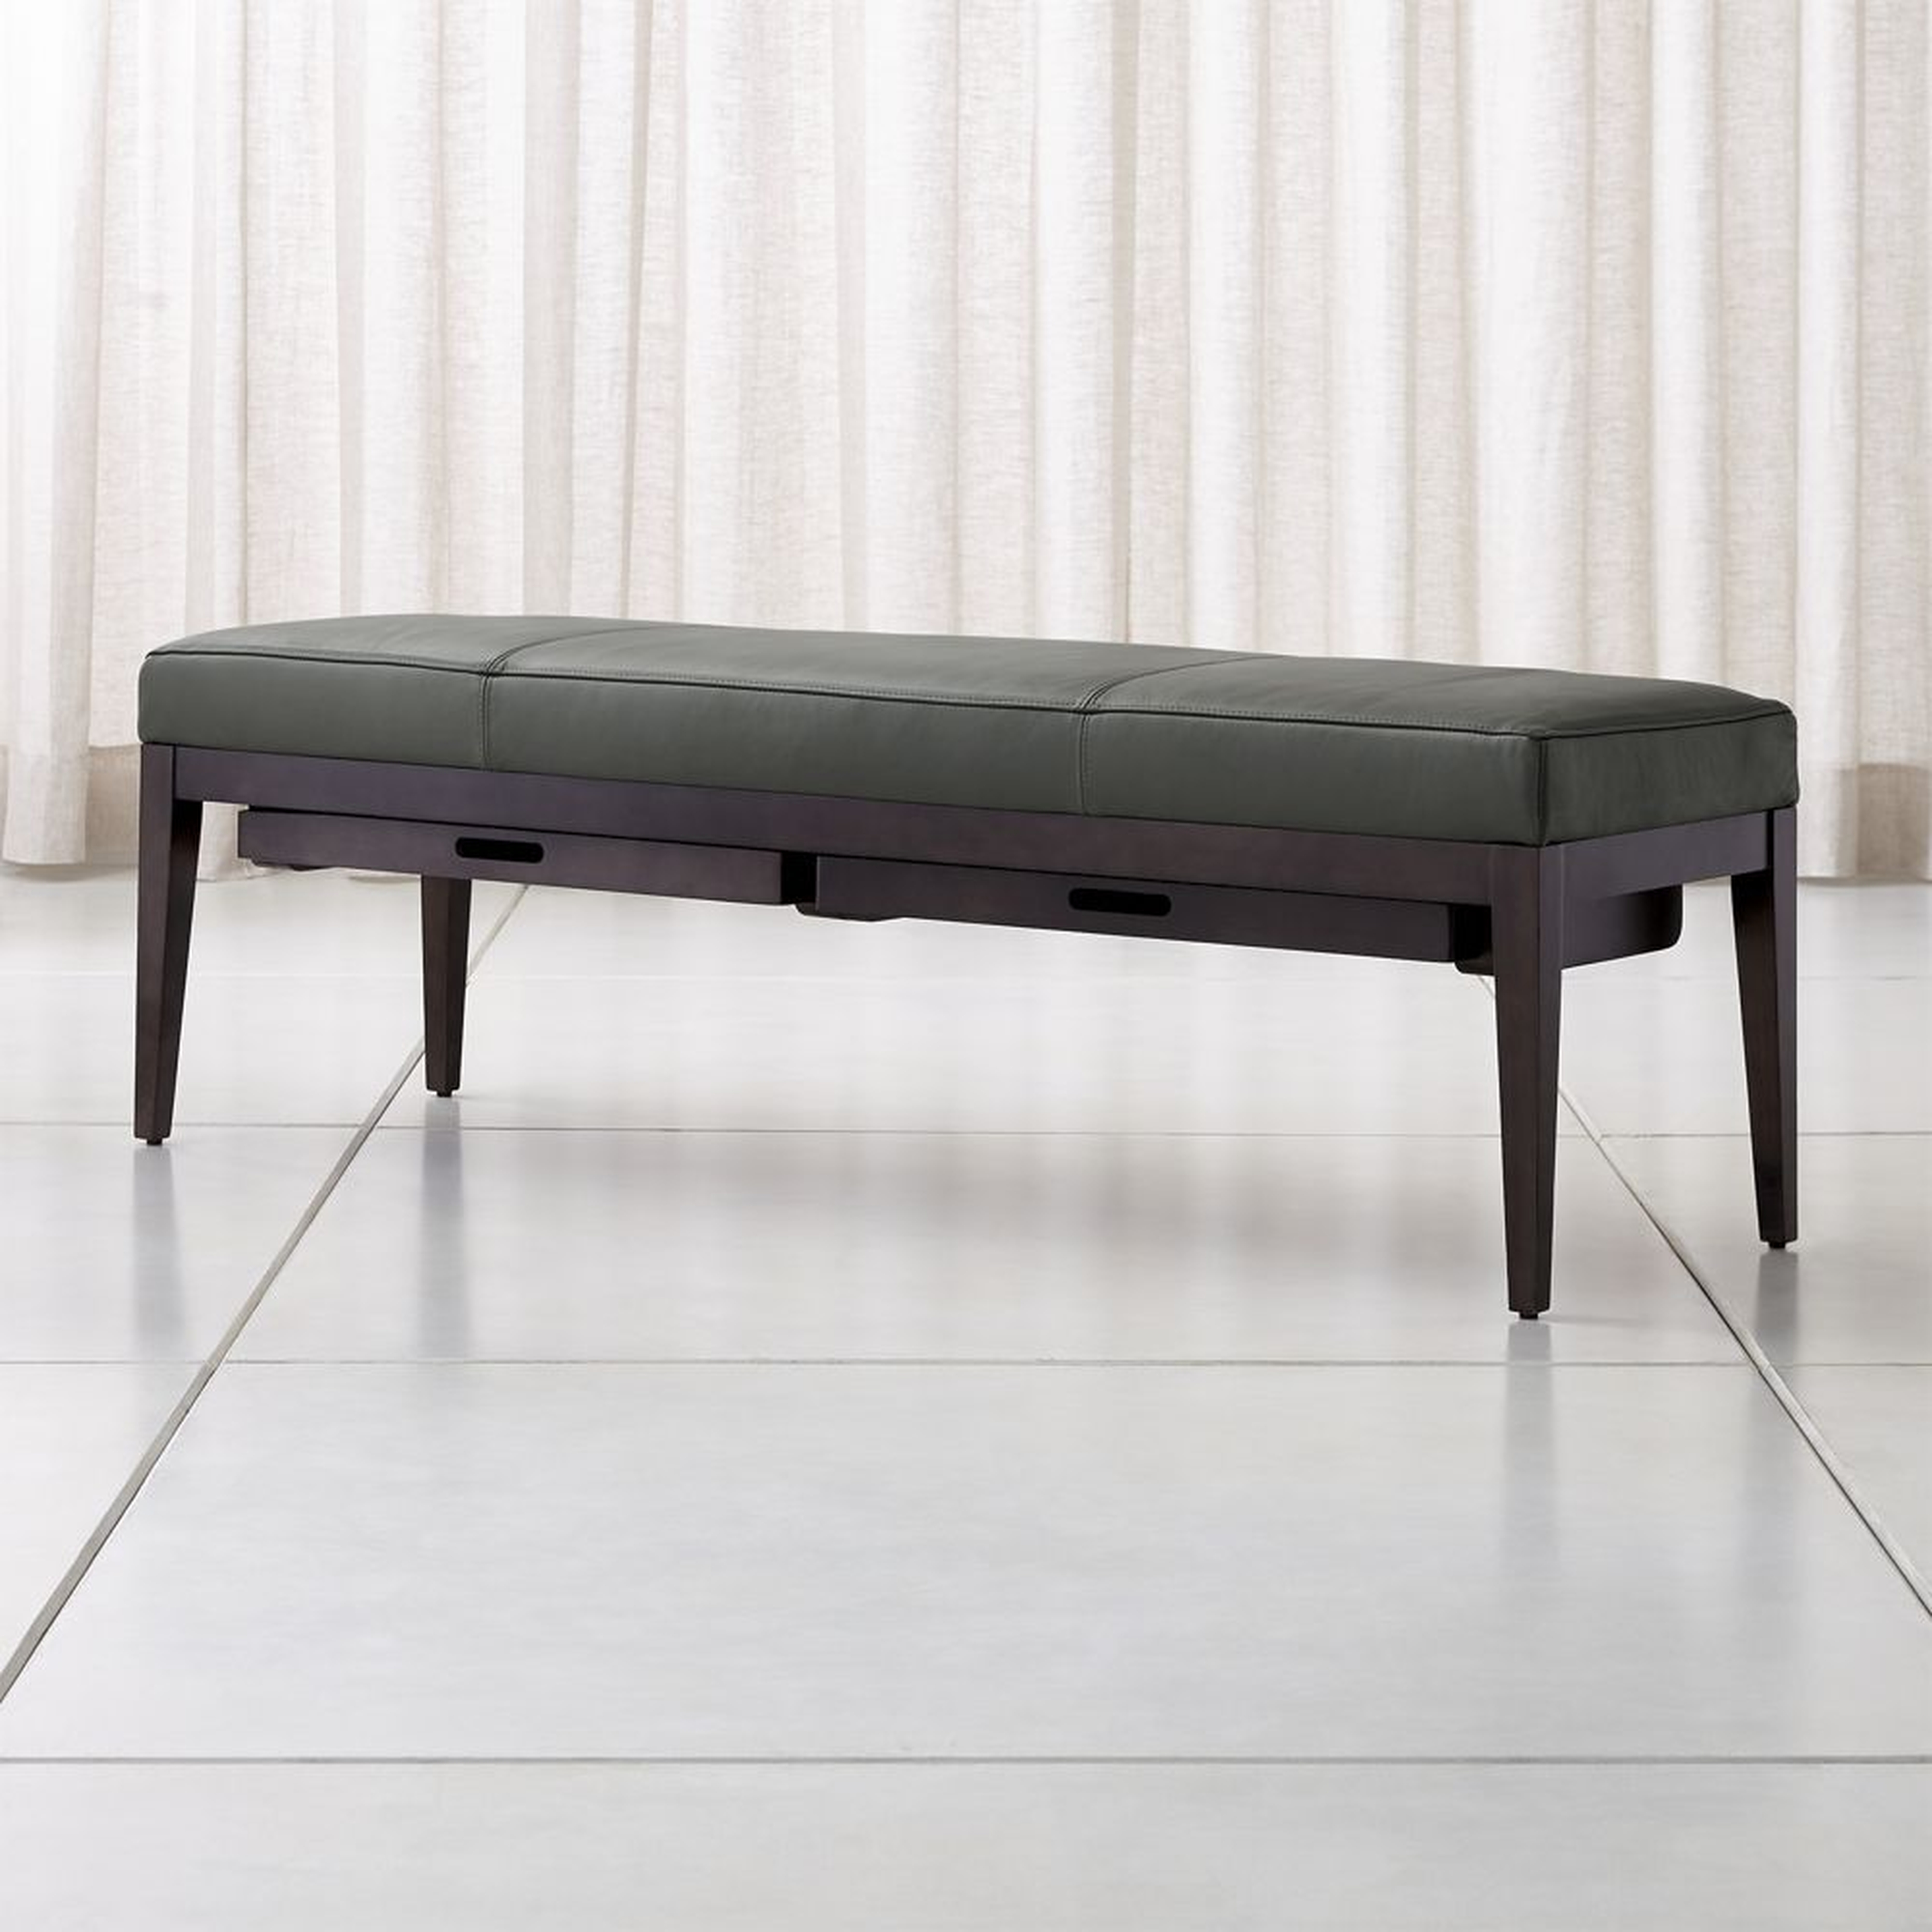 Nash Leather Large Bench with Tray - Crate and Barrel